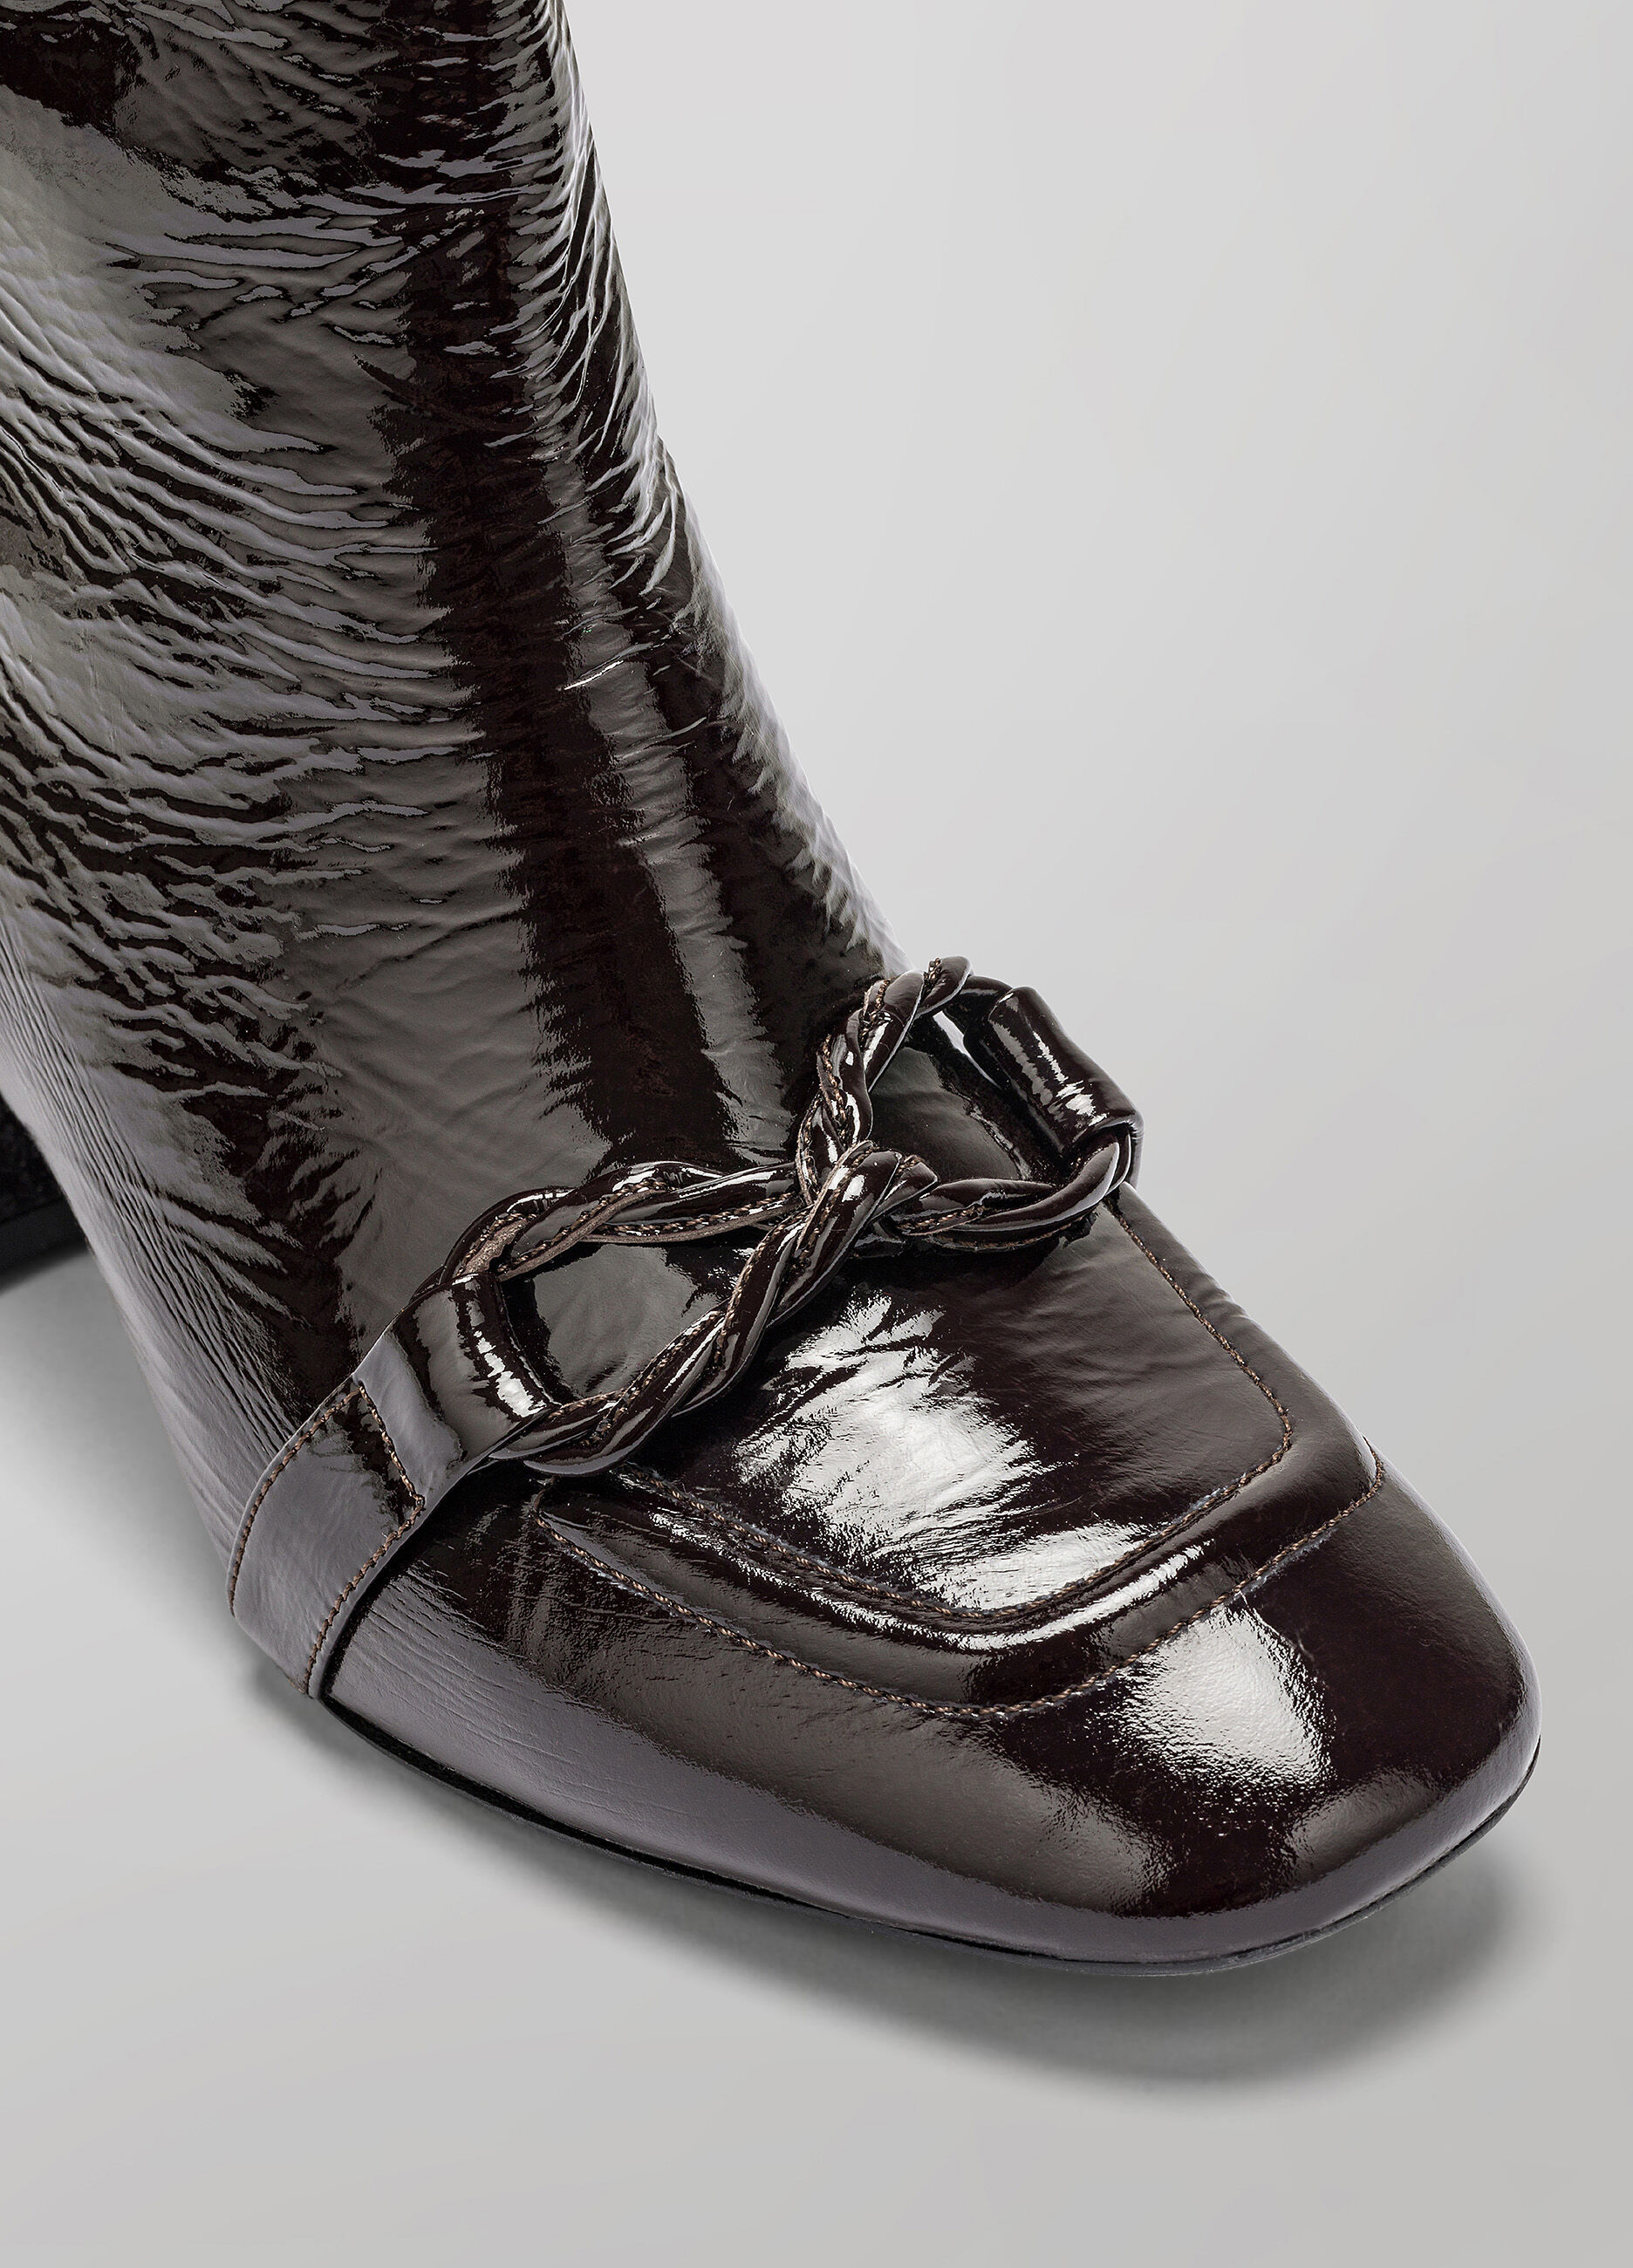 Patent leather naplak ankle boot